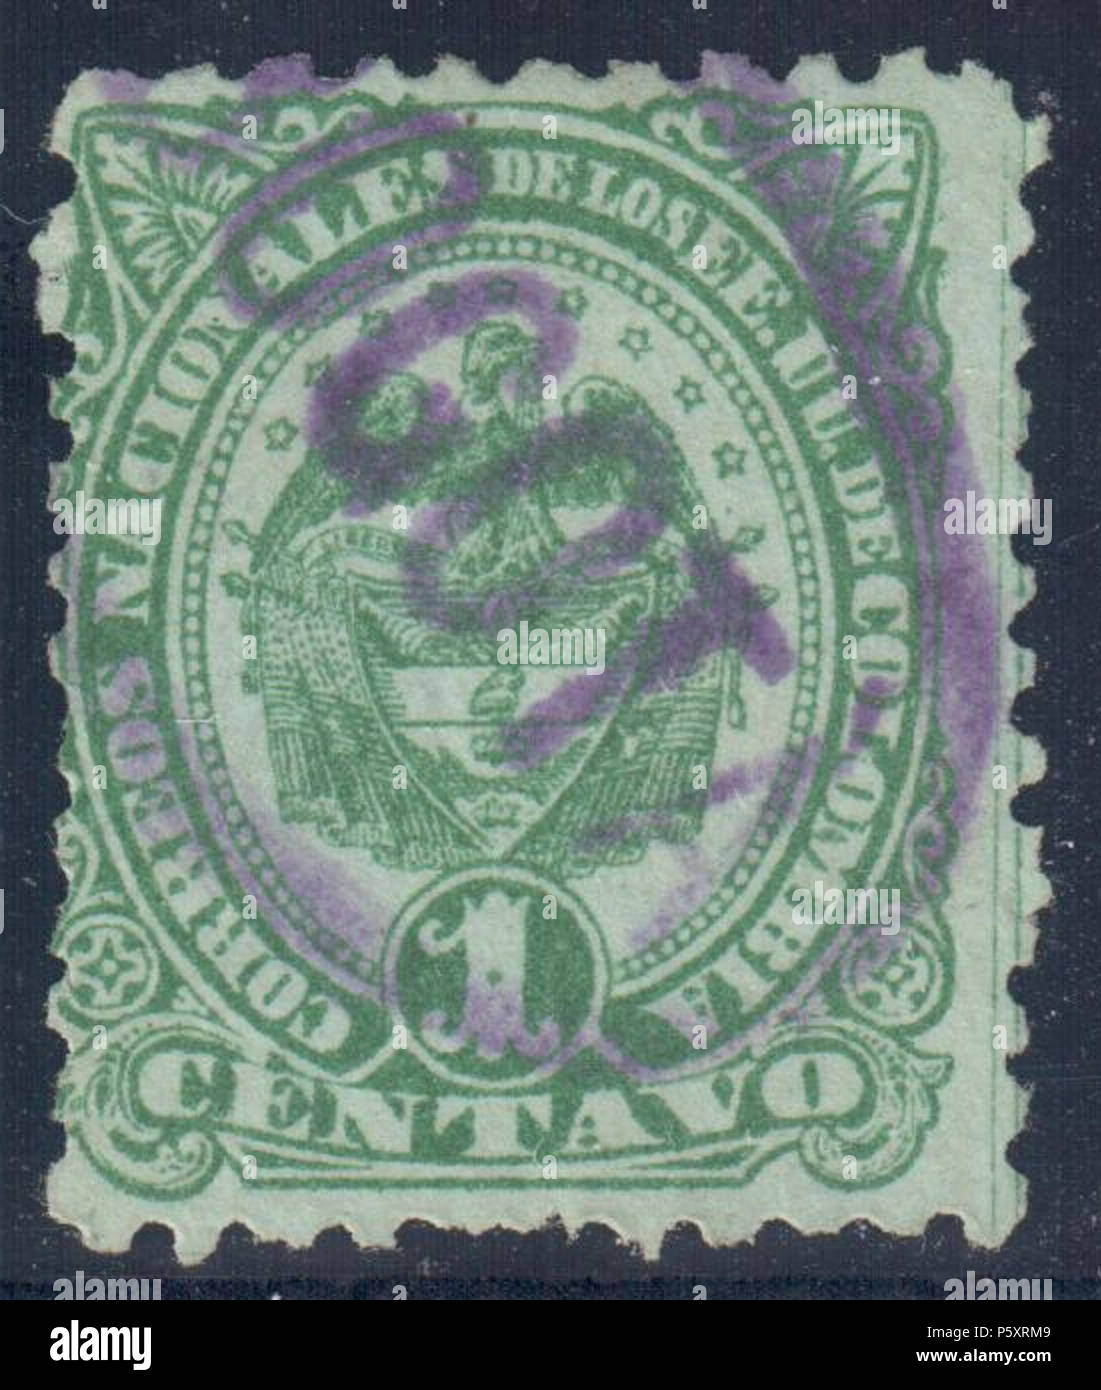 N/A. English: Colombia 1883 1c, used purple '(B)OGOTA'. Catalogue: Sc. 116, Mi. 78 Paper: Green wove unwtmk Perforation: 10.5 to 13.5 Printing: Lithography Printer: D. Paredes Printing Ltd, Bogota . 1883. Colombian government 367 Colombia 1883 Sc116u Stock Photo